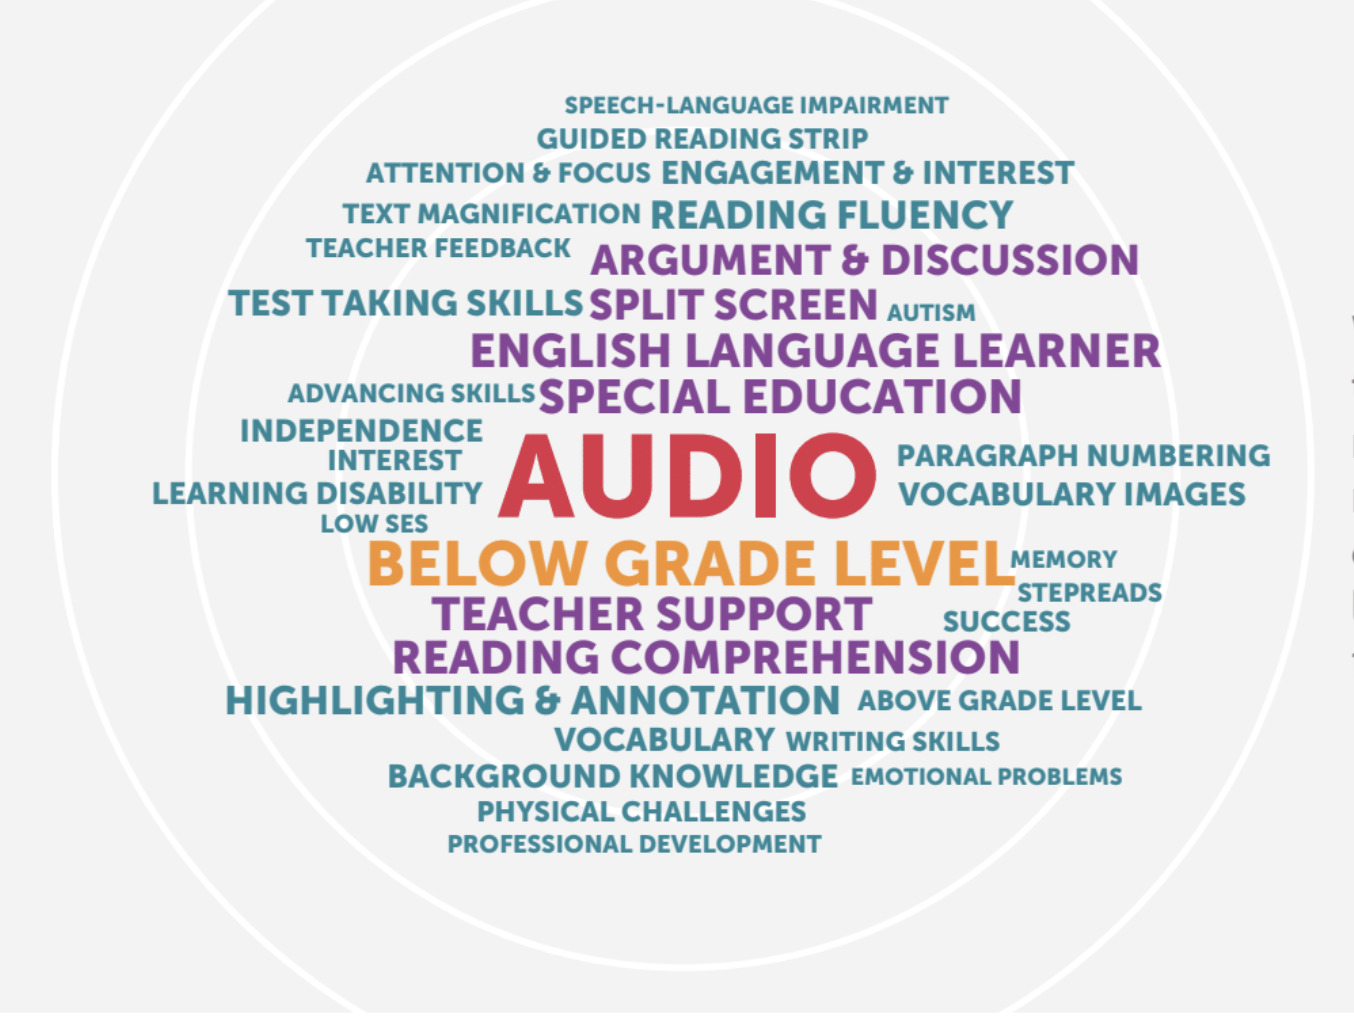 Word cloud of frequently used words from teachers’ coded responses about how the new product features supported diverse student needs; popular phrases included “audio,” “below grade level,” “teacher support,” “reaching comprehension,” “special education,” and “English language learner.”